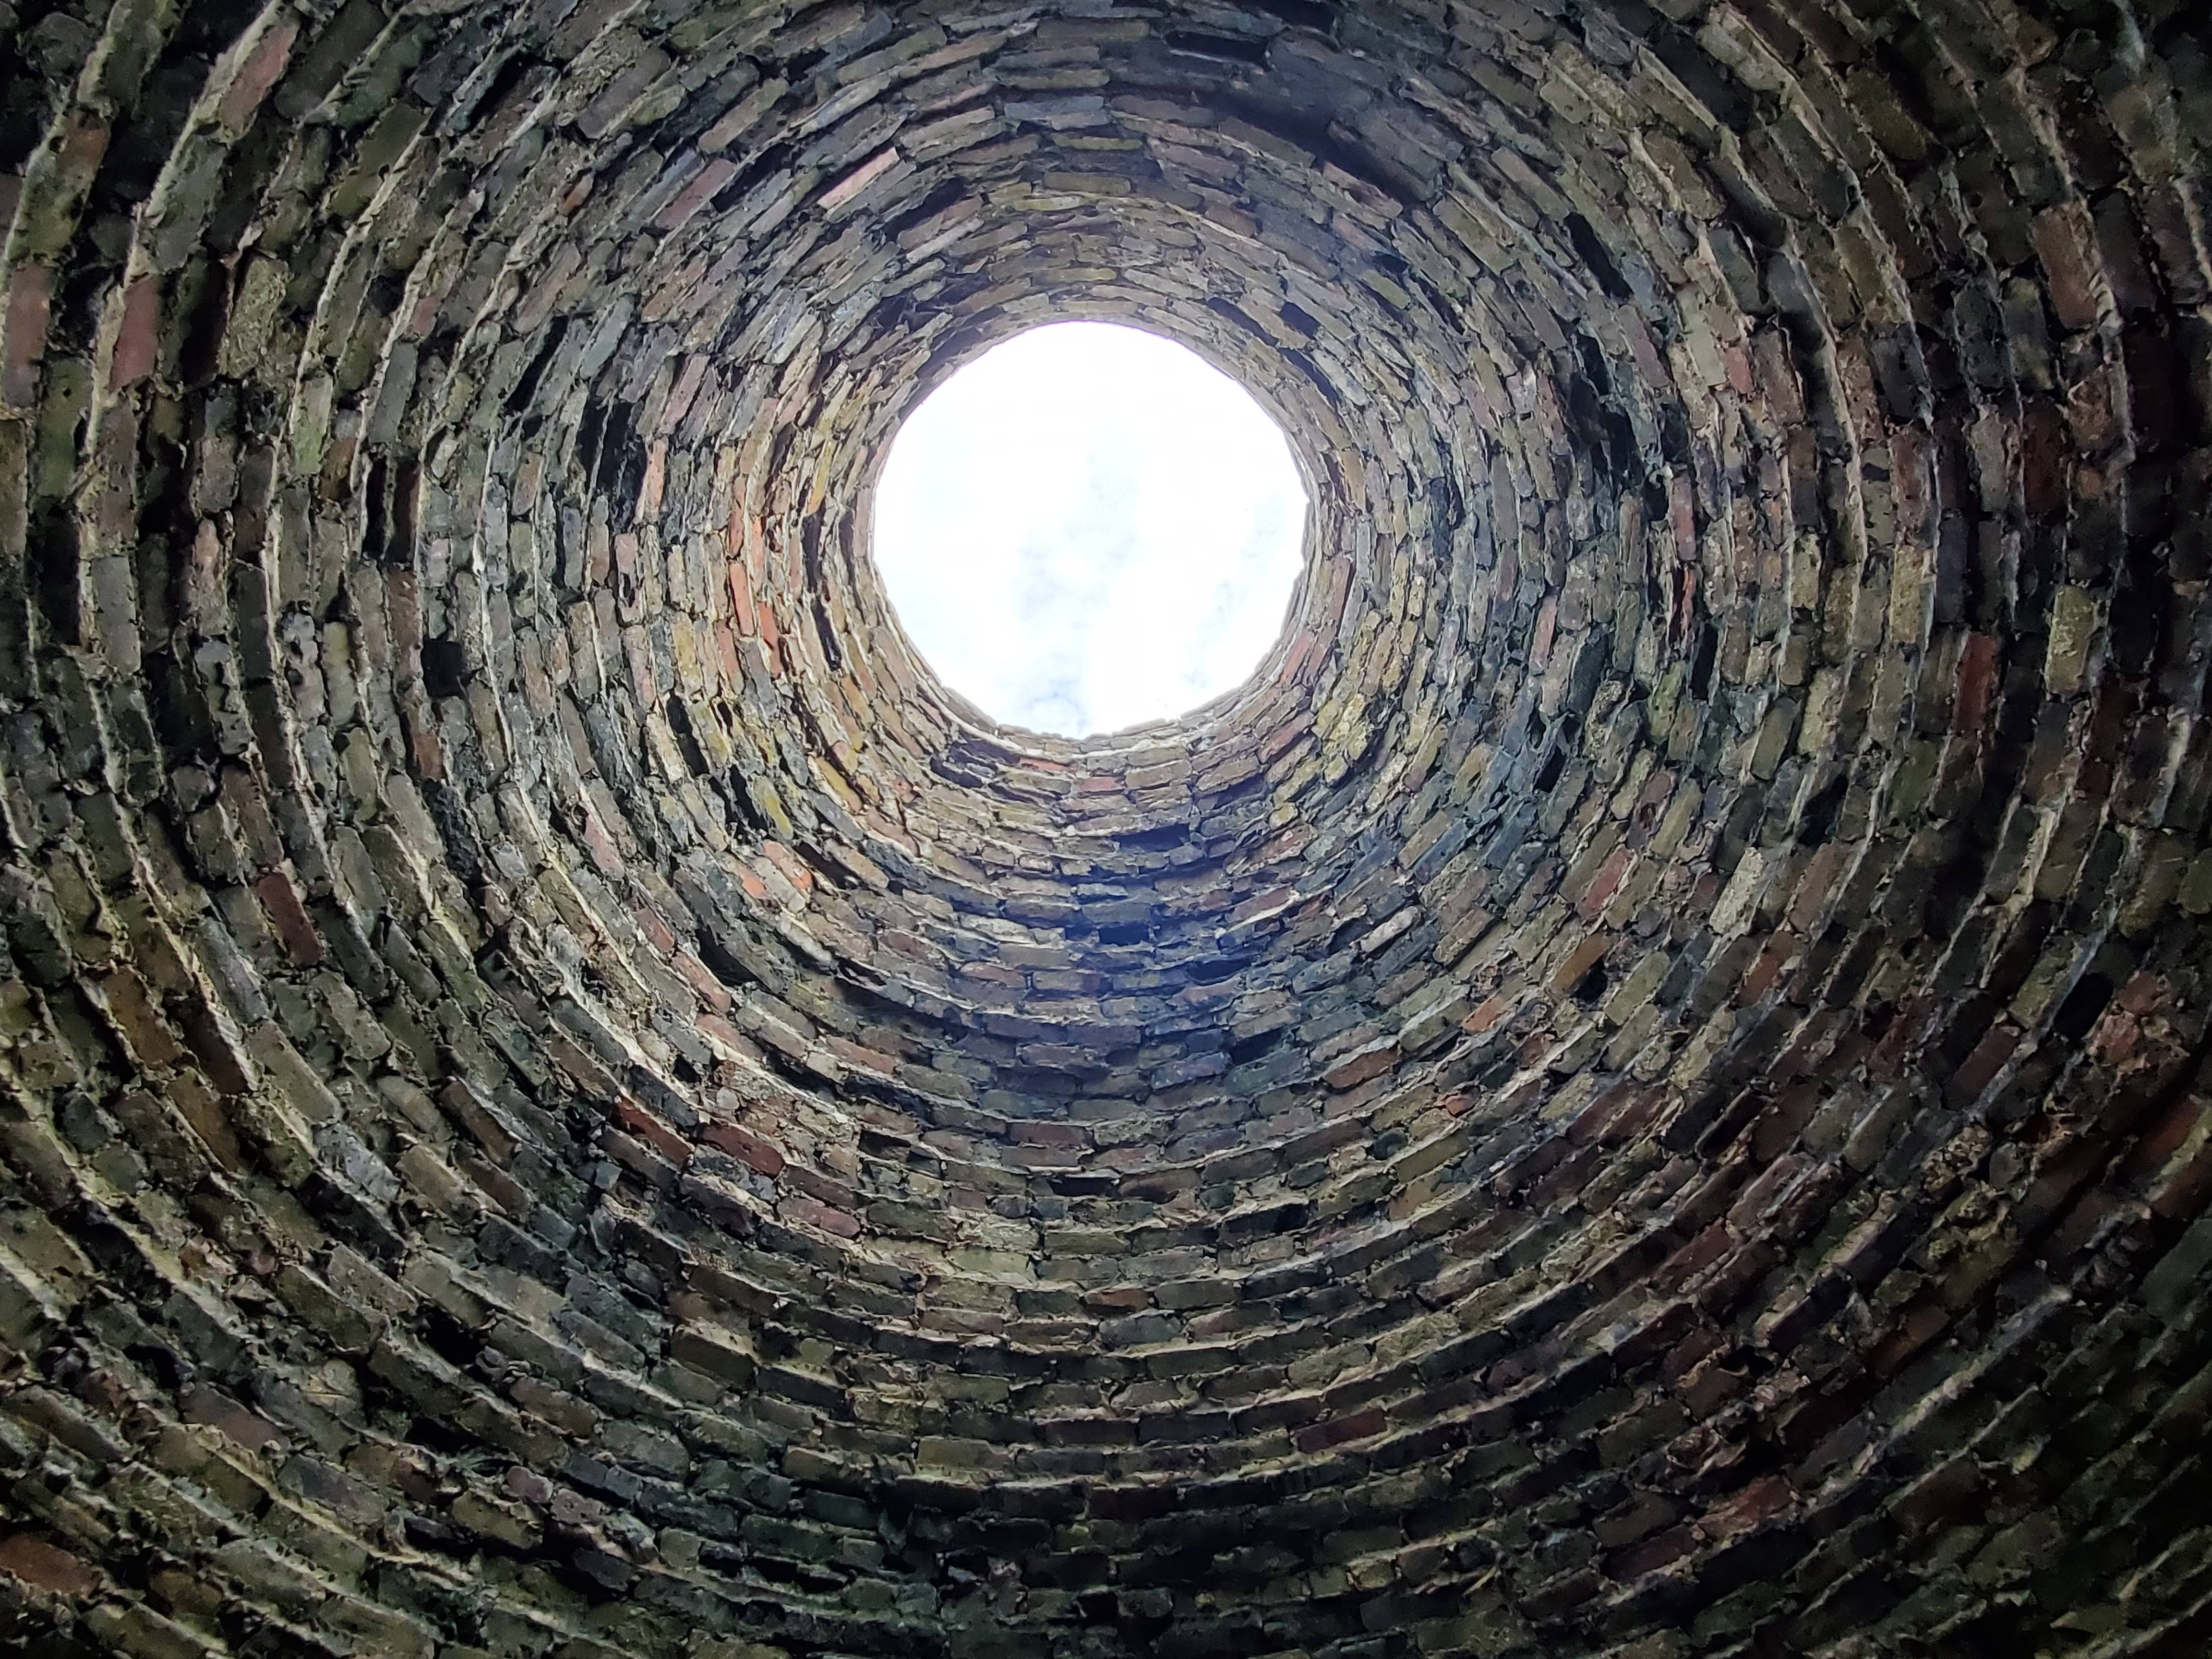 Looking up through the old kiln at Fayette Historic State Park, August